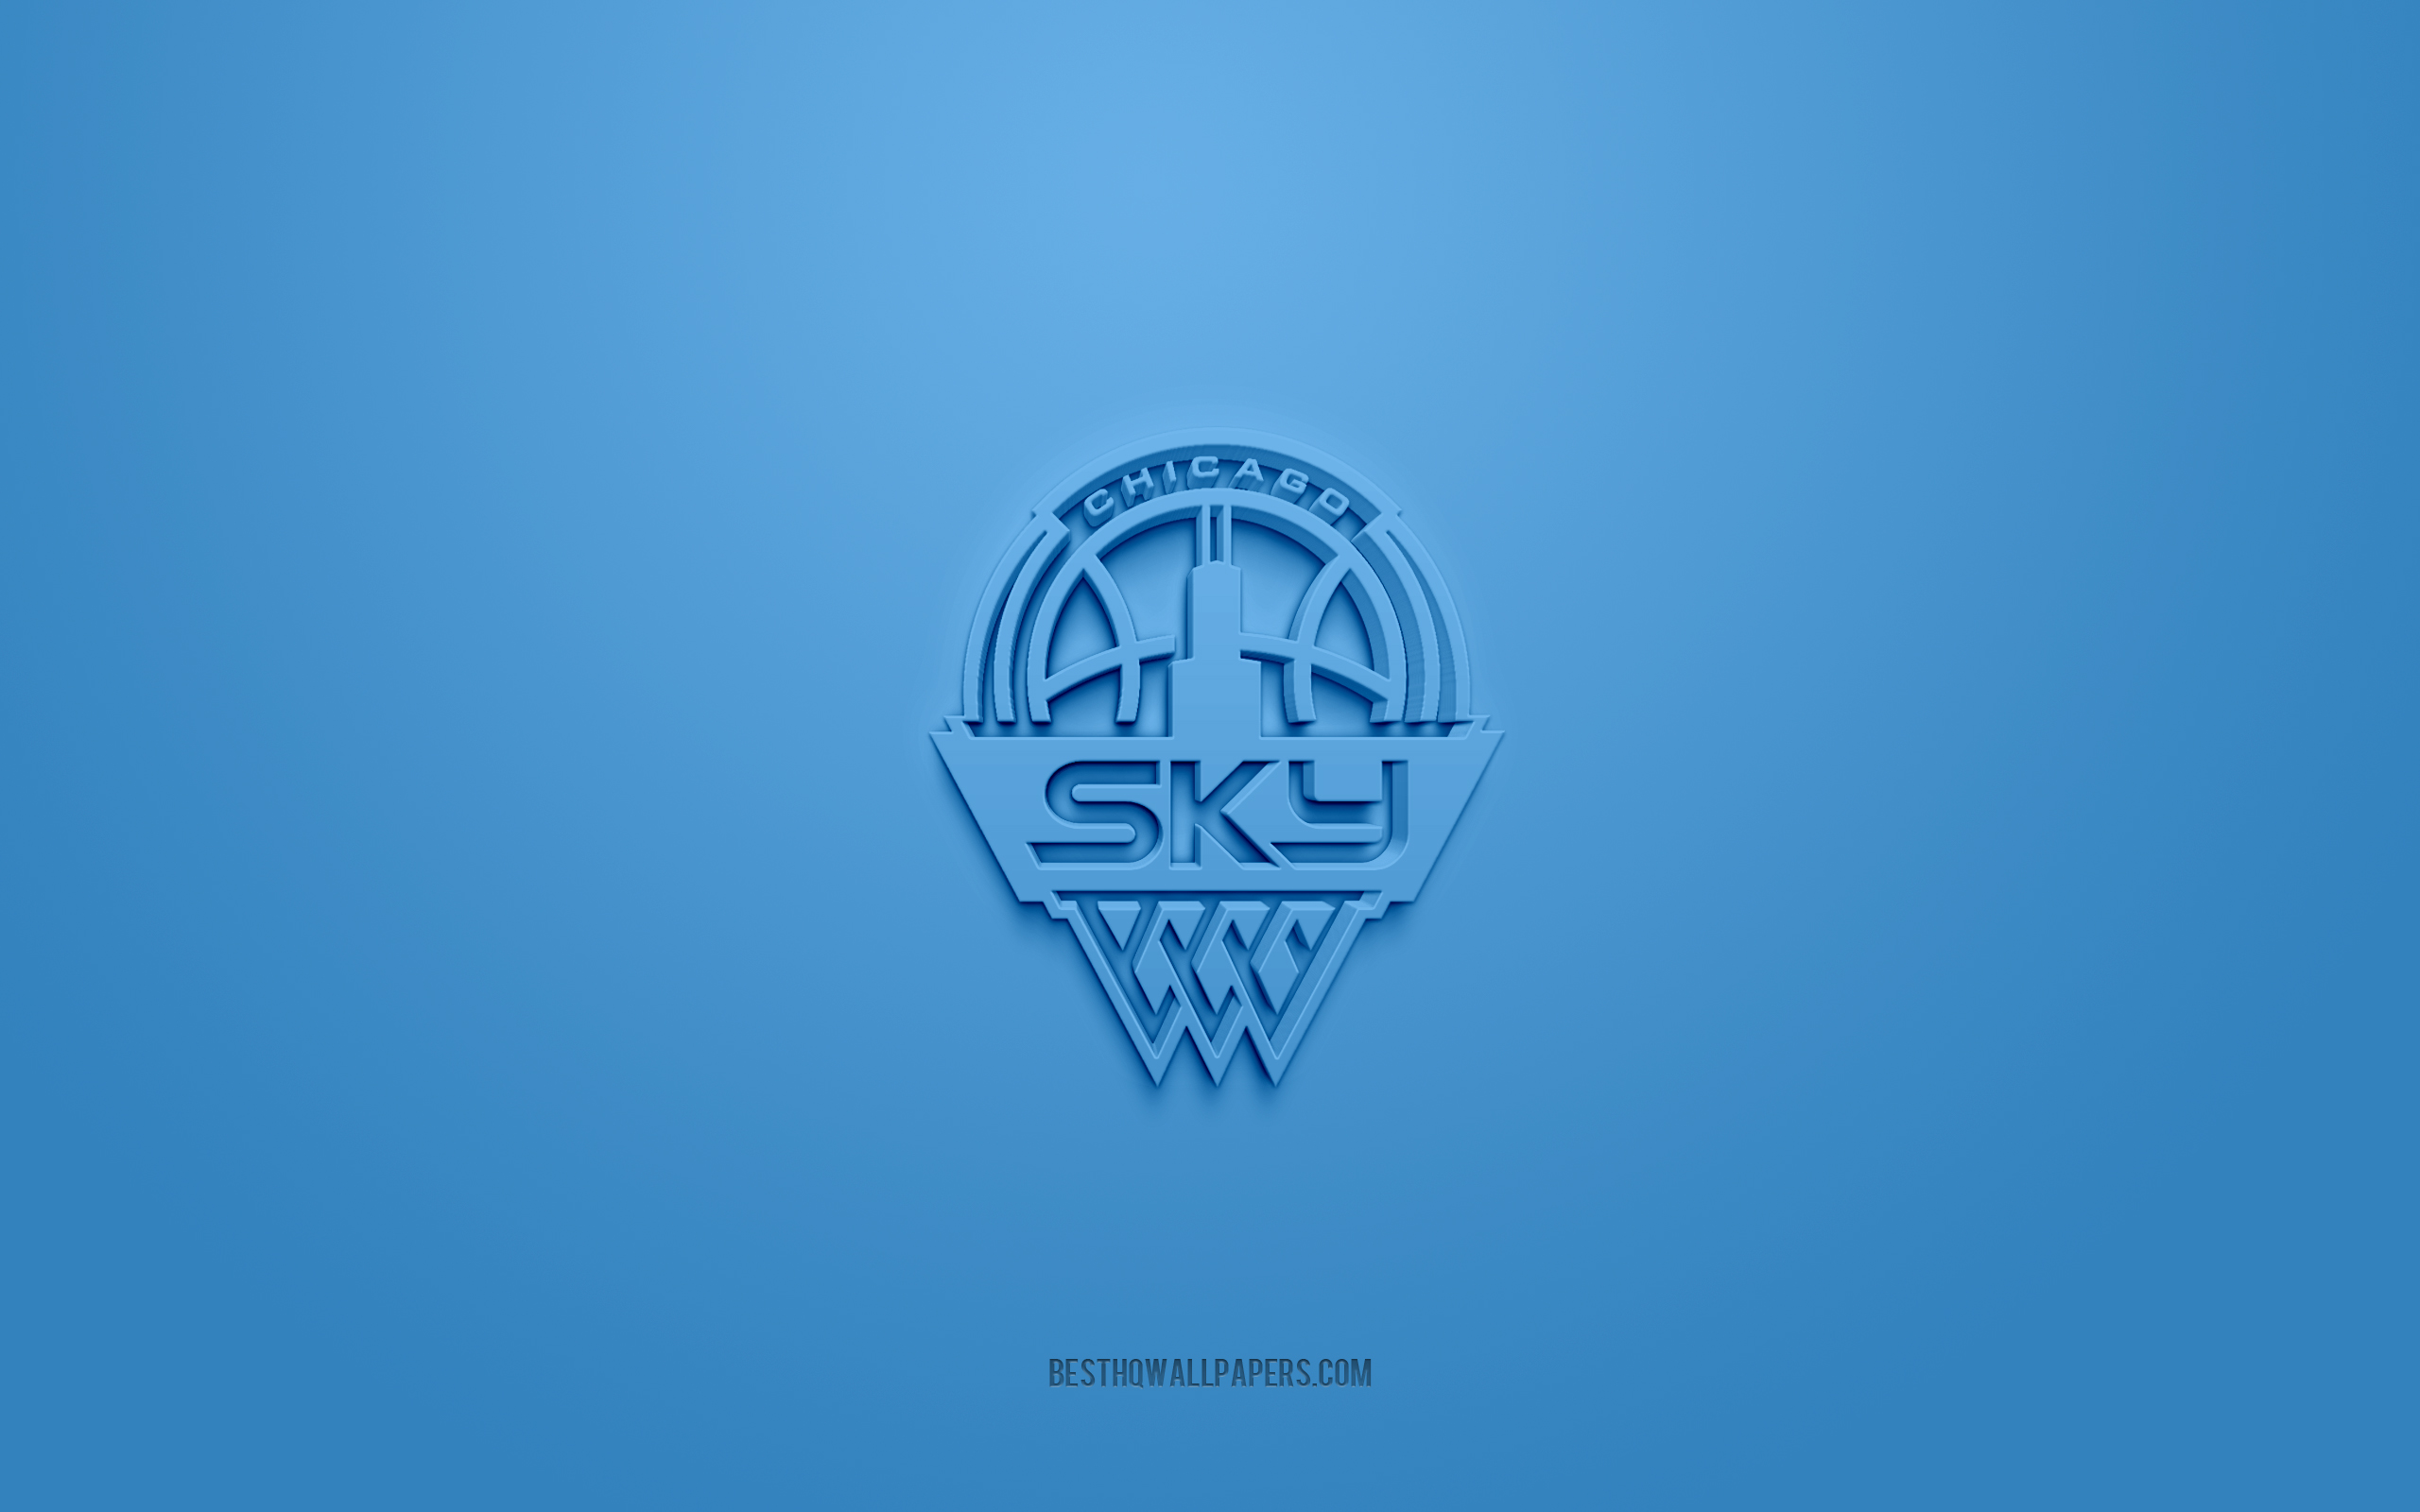 WNBA Images | Icons, Wallpapers and Photos on Fanpop